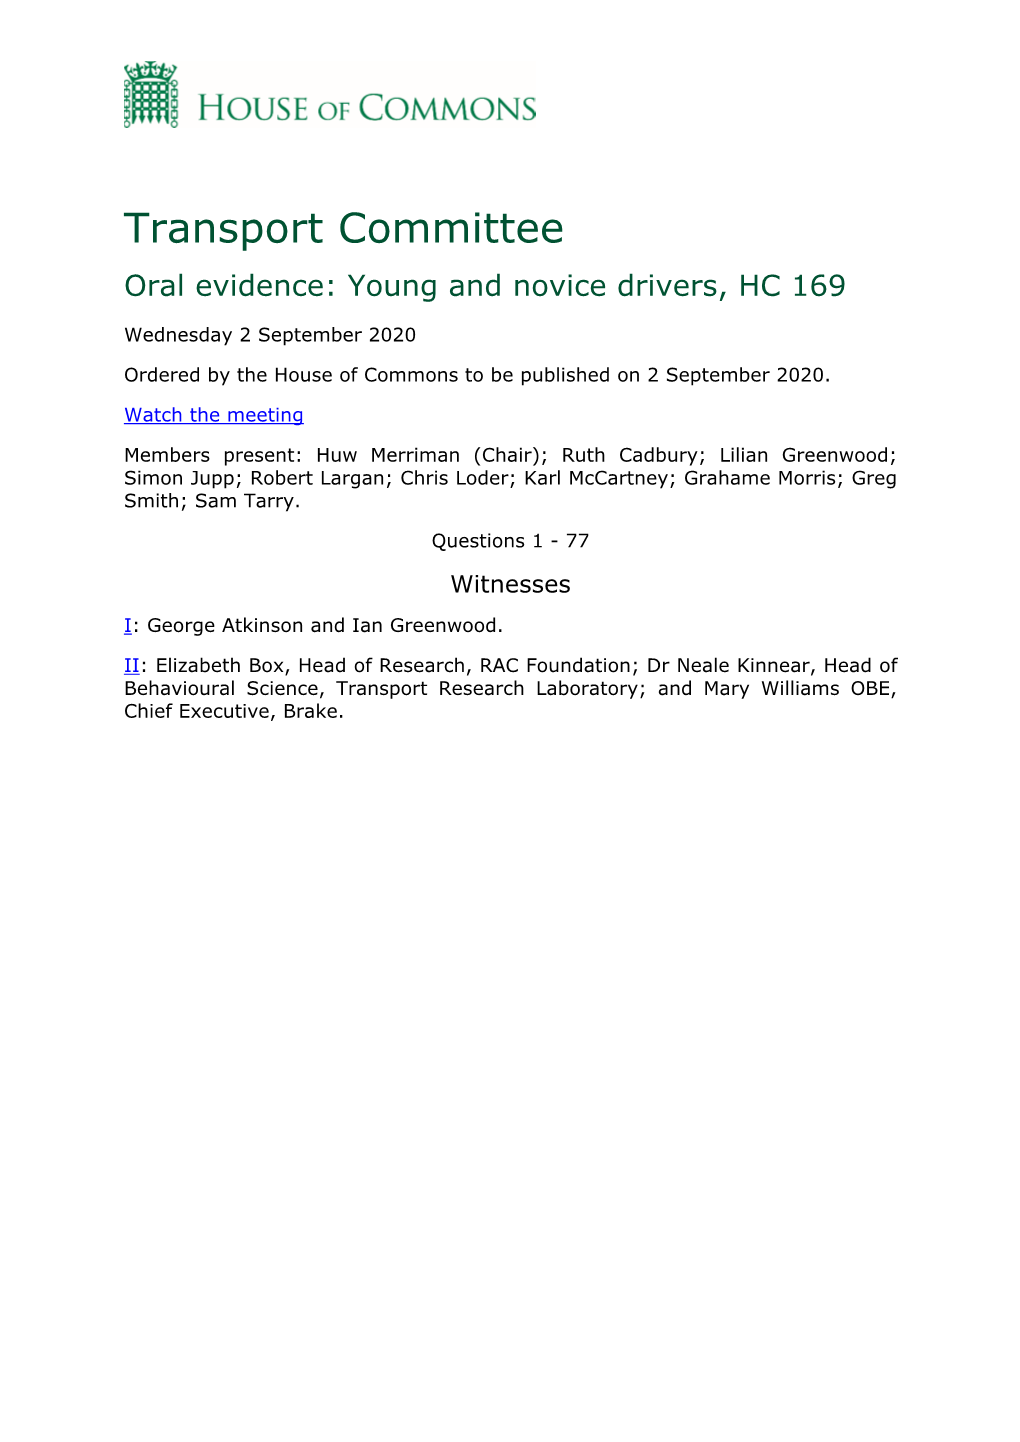 Transport Committee Oral Evidence: Young and Novice Drivers, HC 169